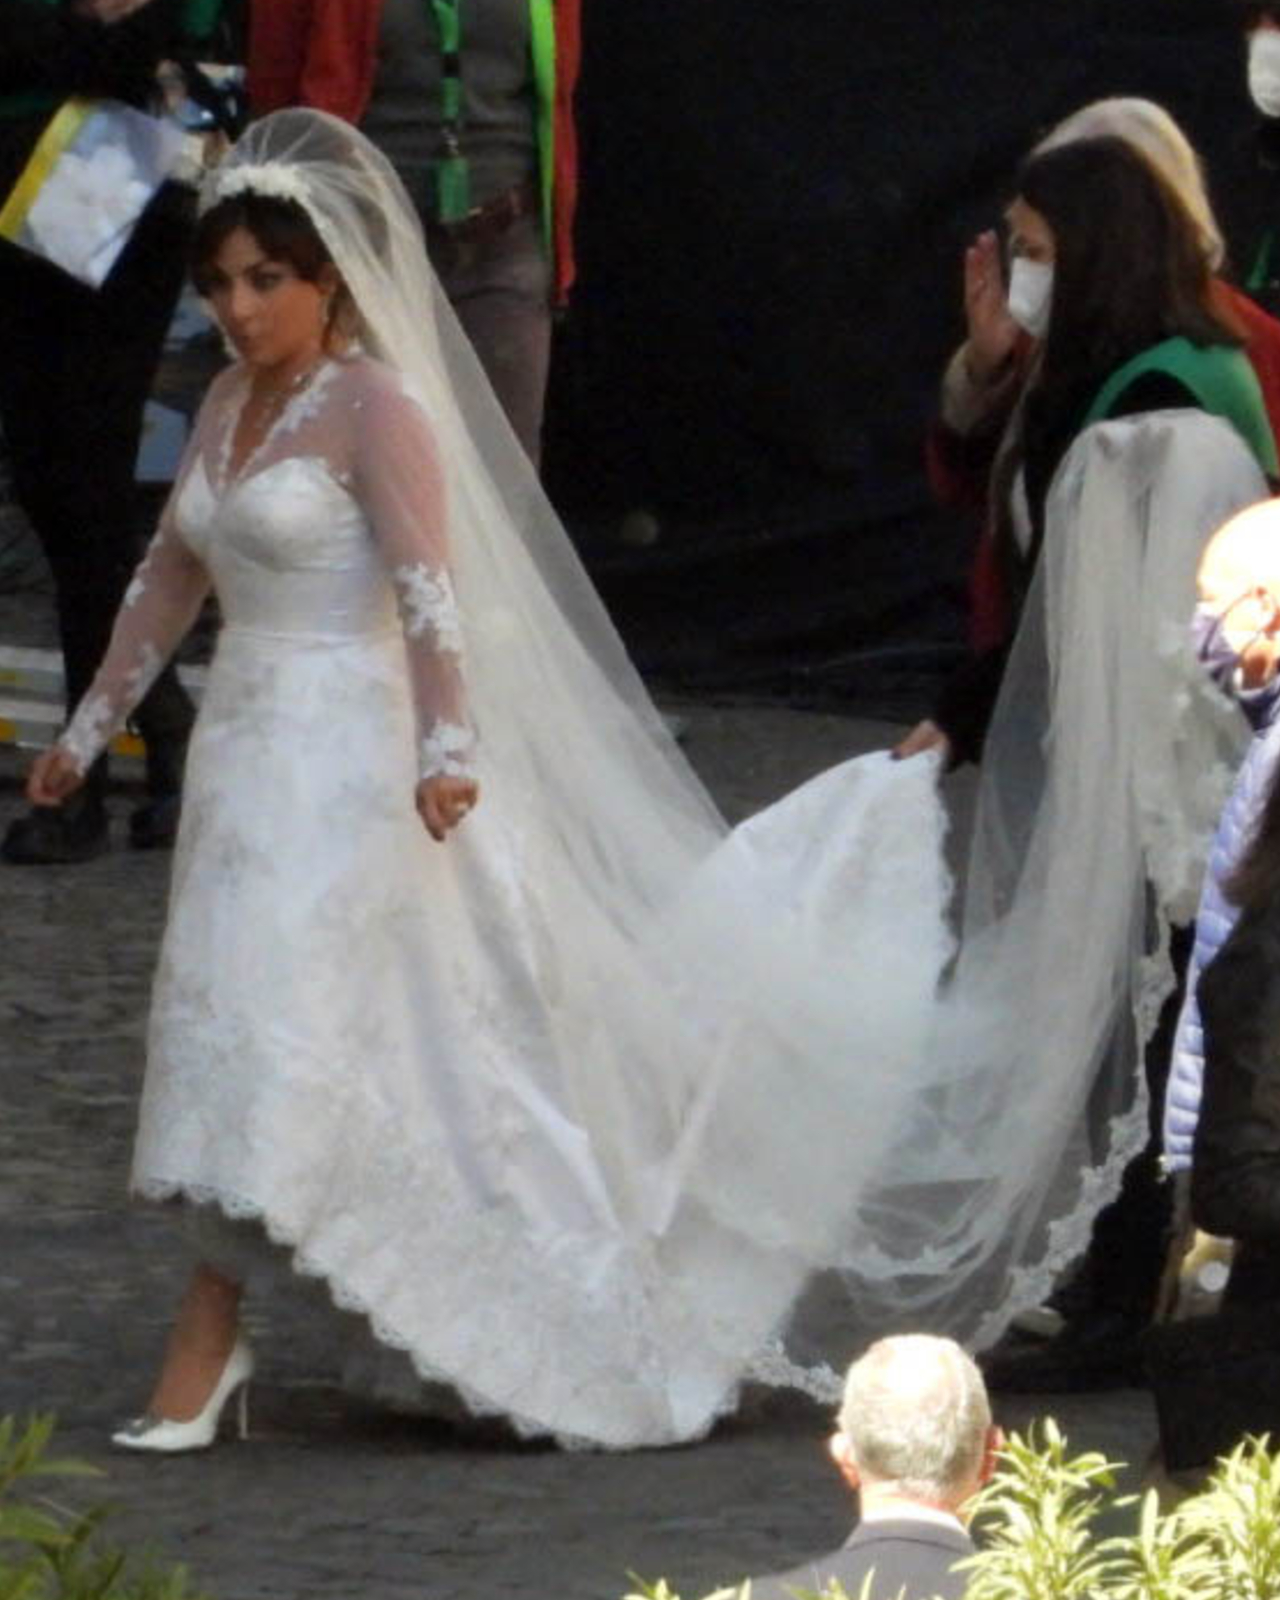 Lady Gaga wears wedding dress while filming 'House of Gucci